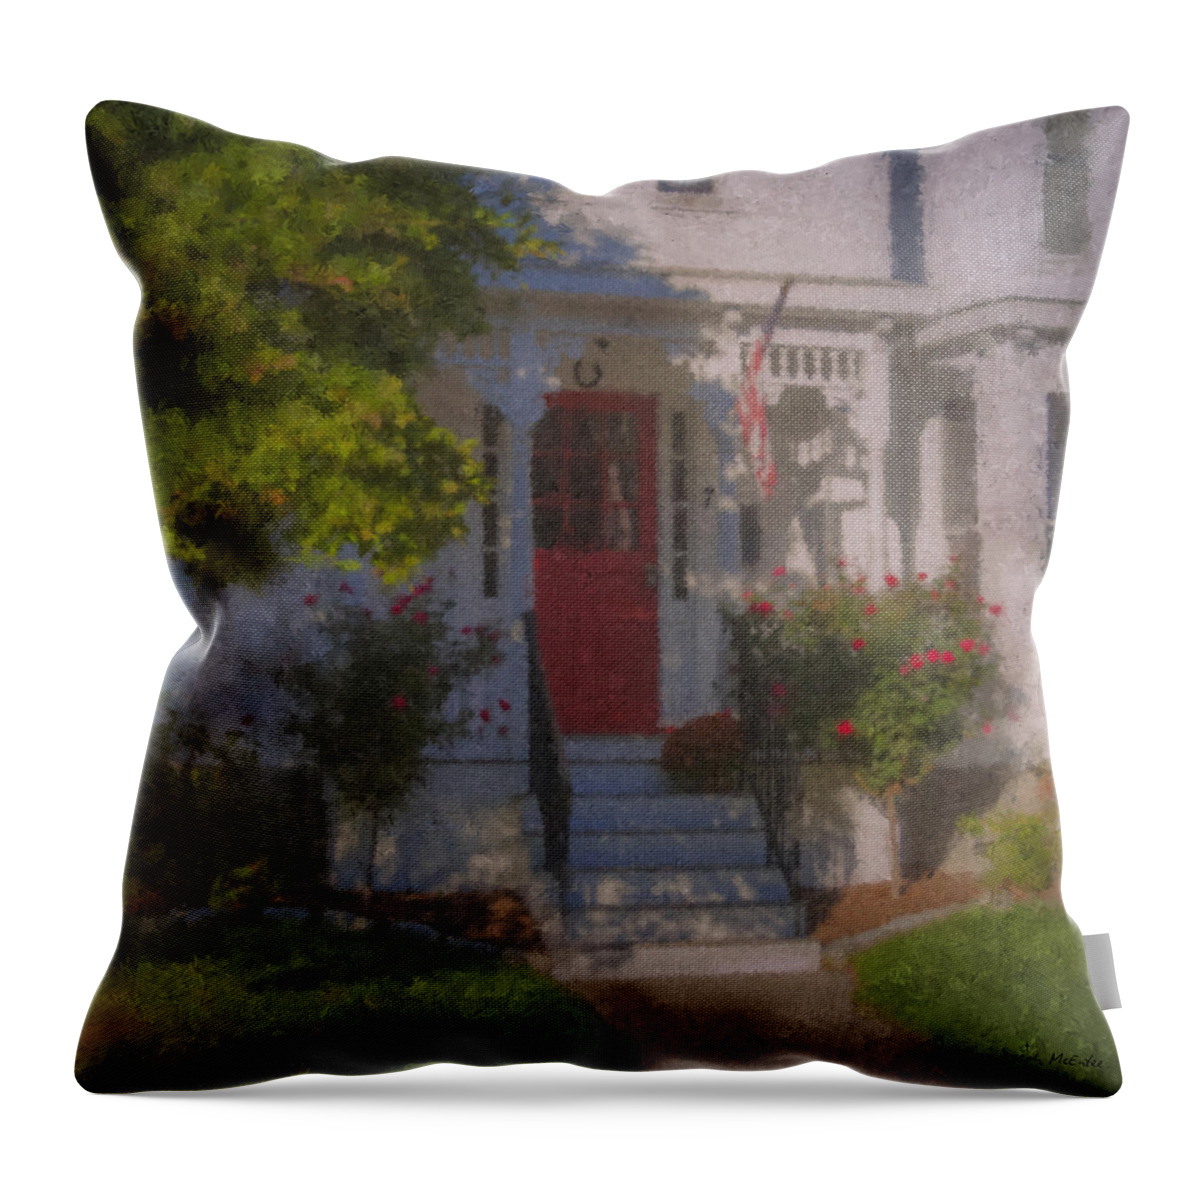 7 Williams Street Throw Pillow featuring the painting 7 Williams Street by Bill McEntee